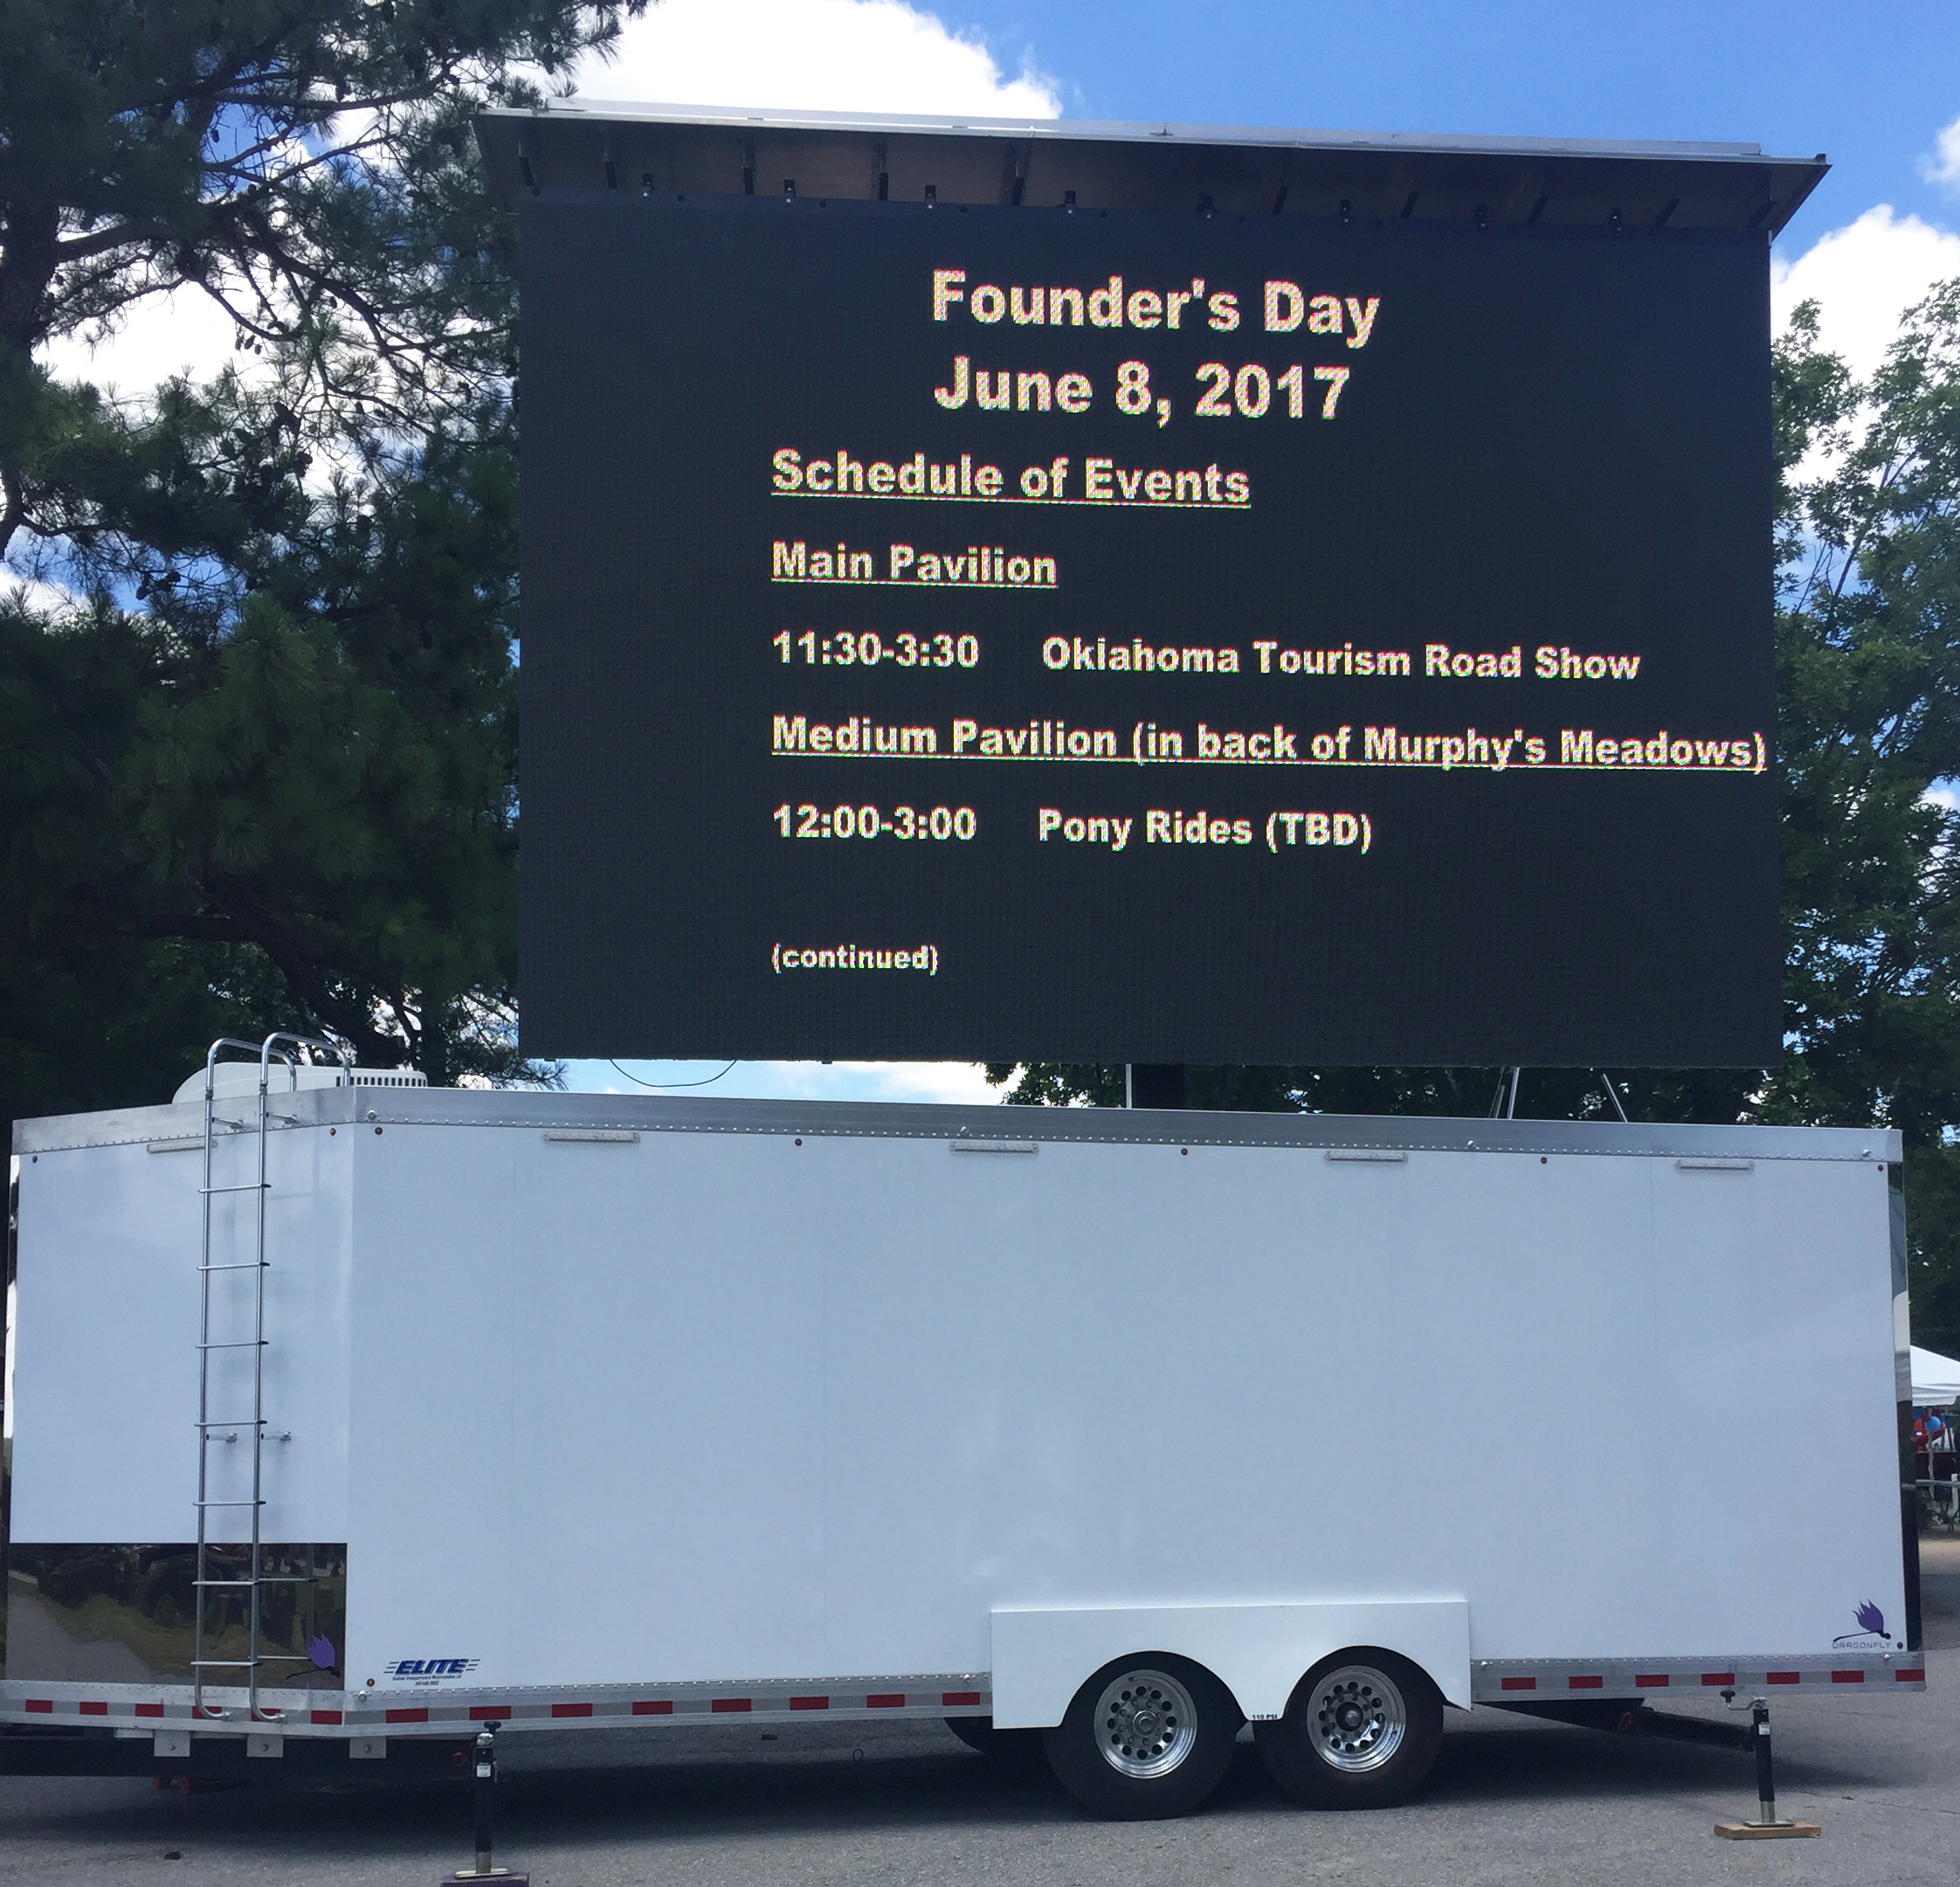 mobile jumbotron for messaging and traffic control